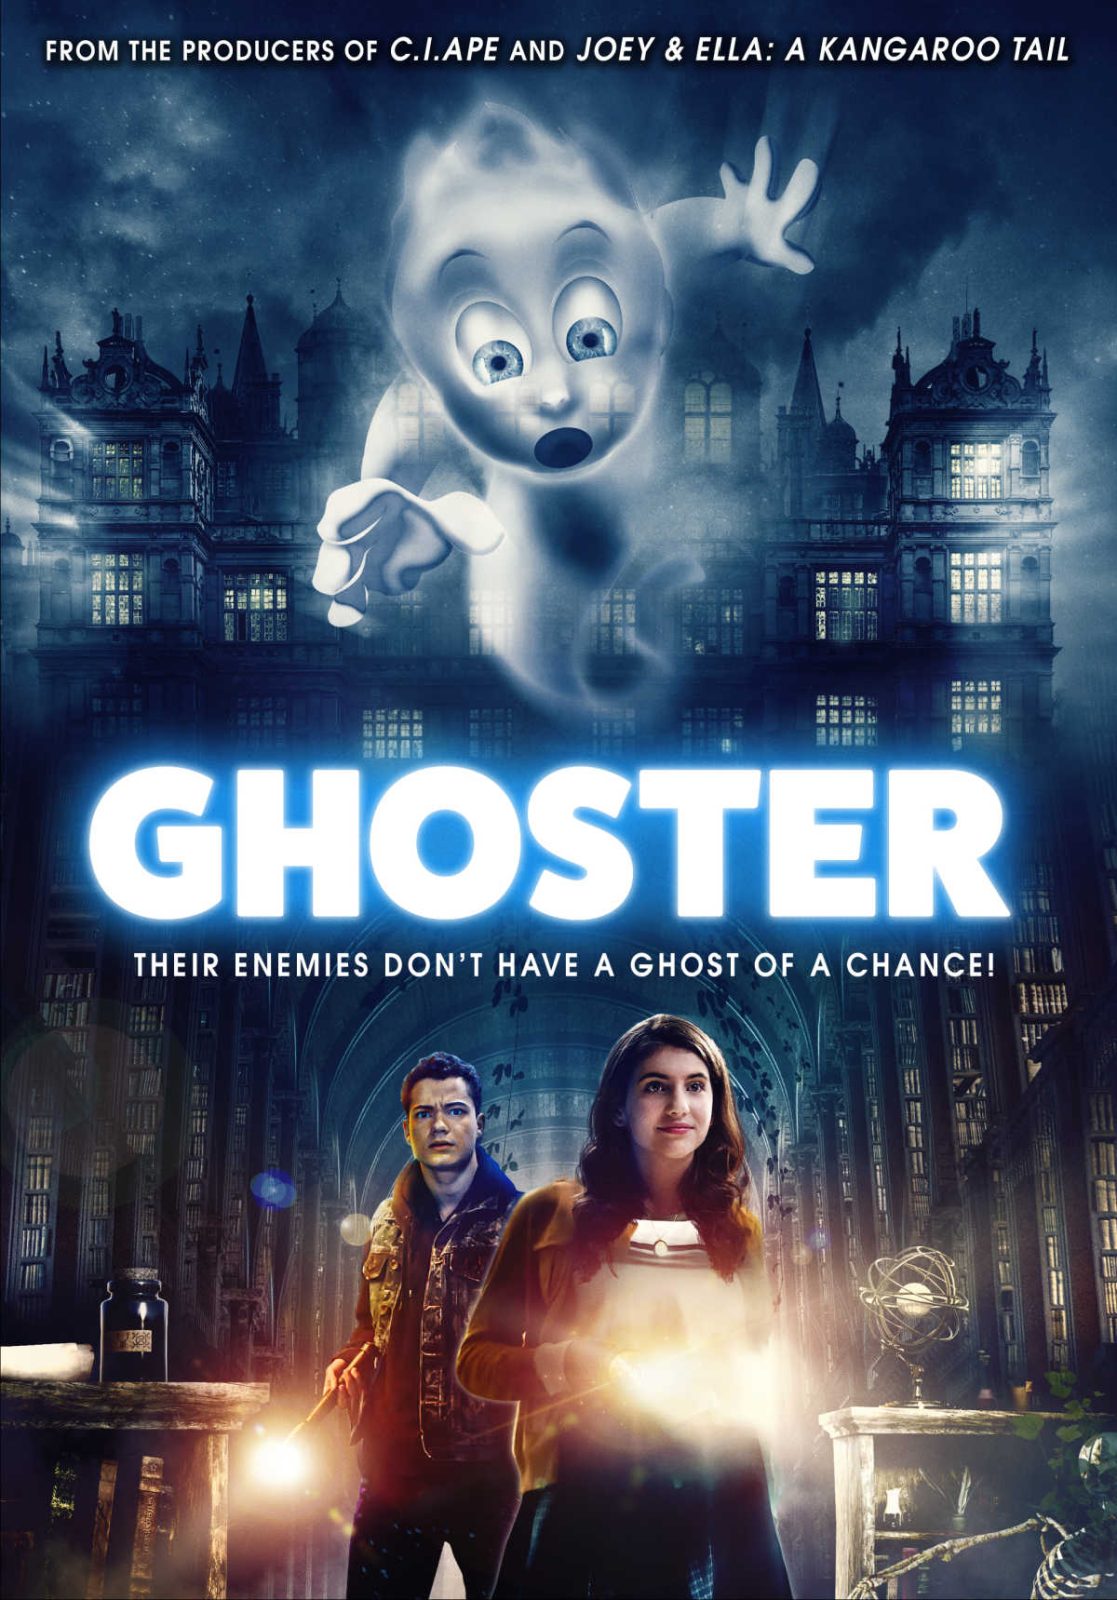 Get the new Ghoster DVD for your kids, so they can have some spooky supernatural thrills that aren't too scary.